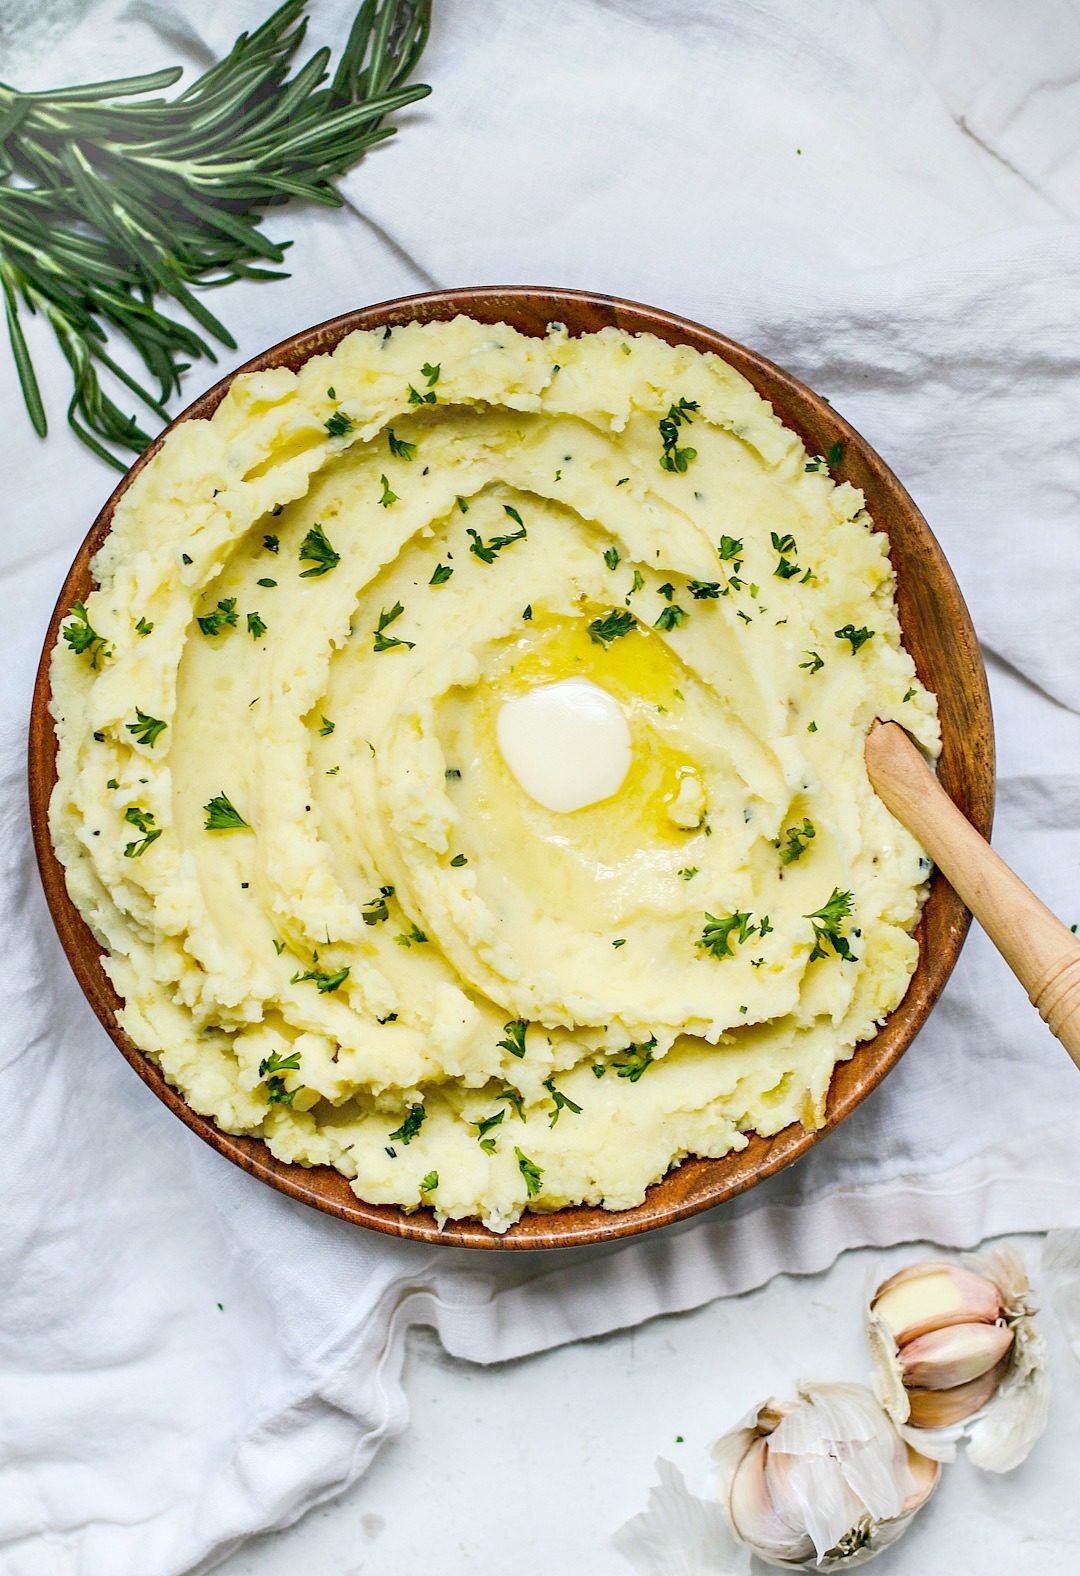 Big buttery bowl of mashed potatoes with roasted garlic and rosemary.